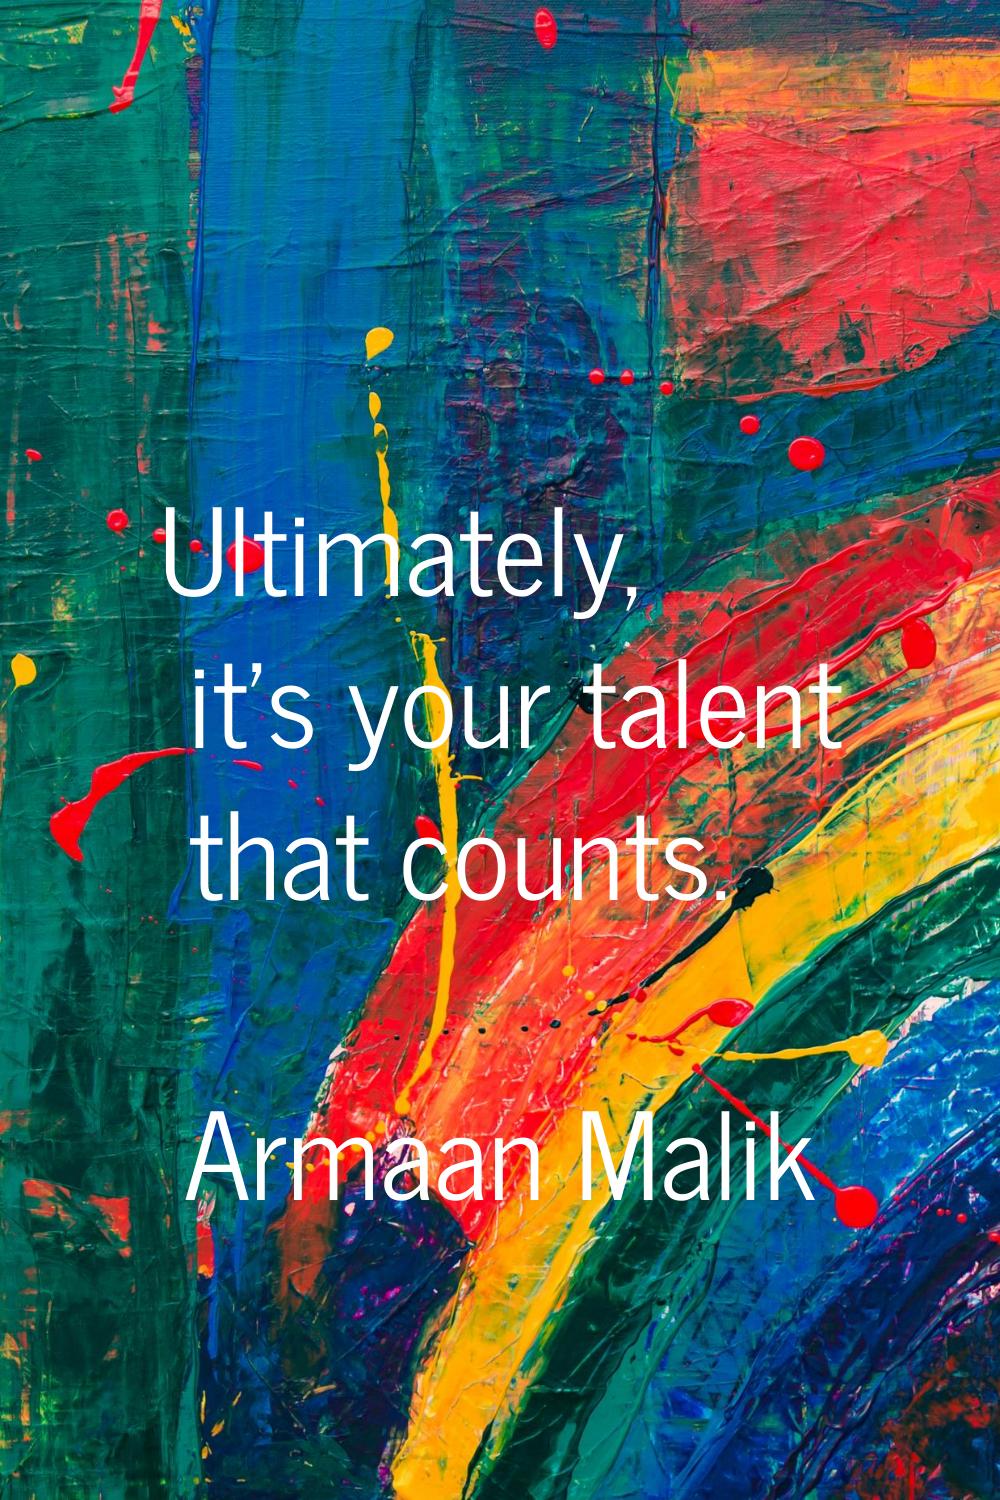 Ultimately, it's your talent that counts.